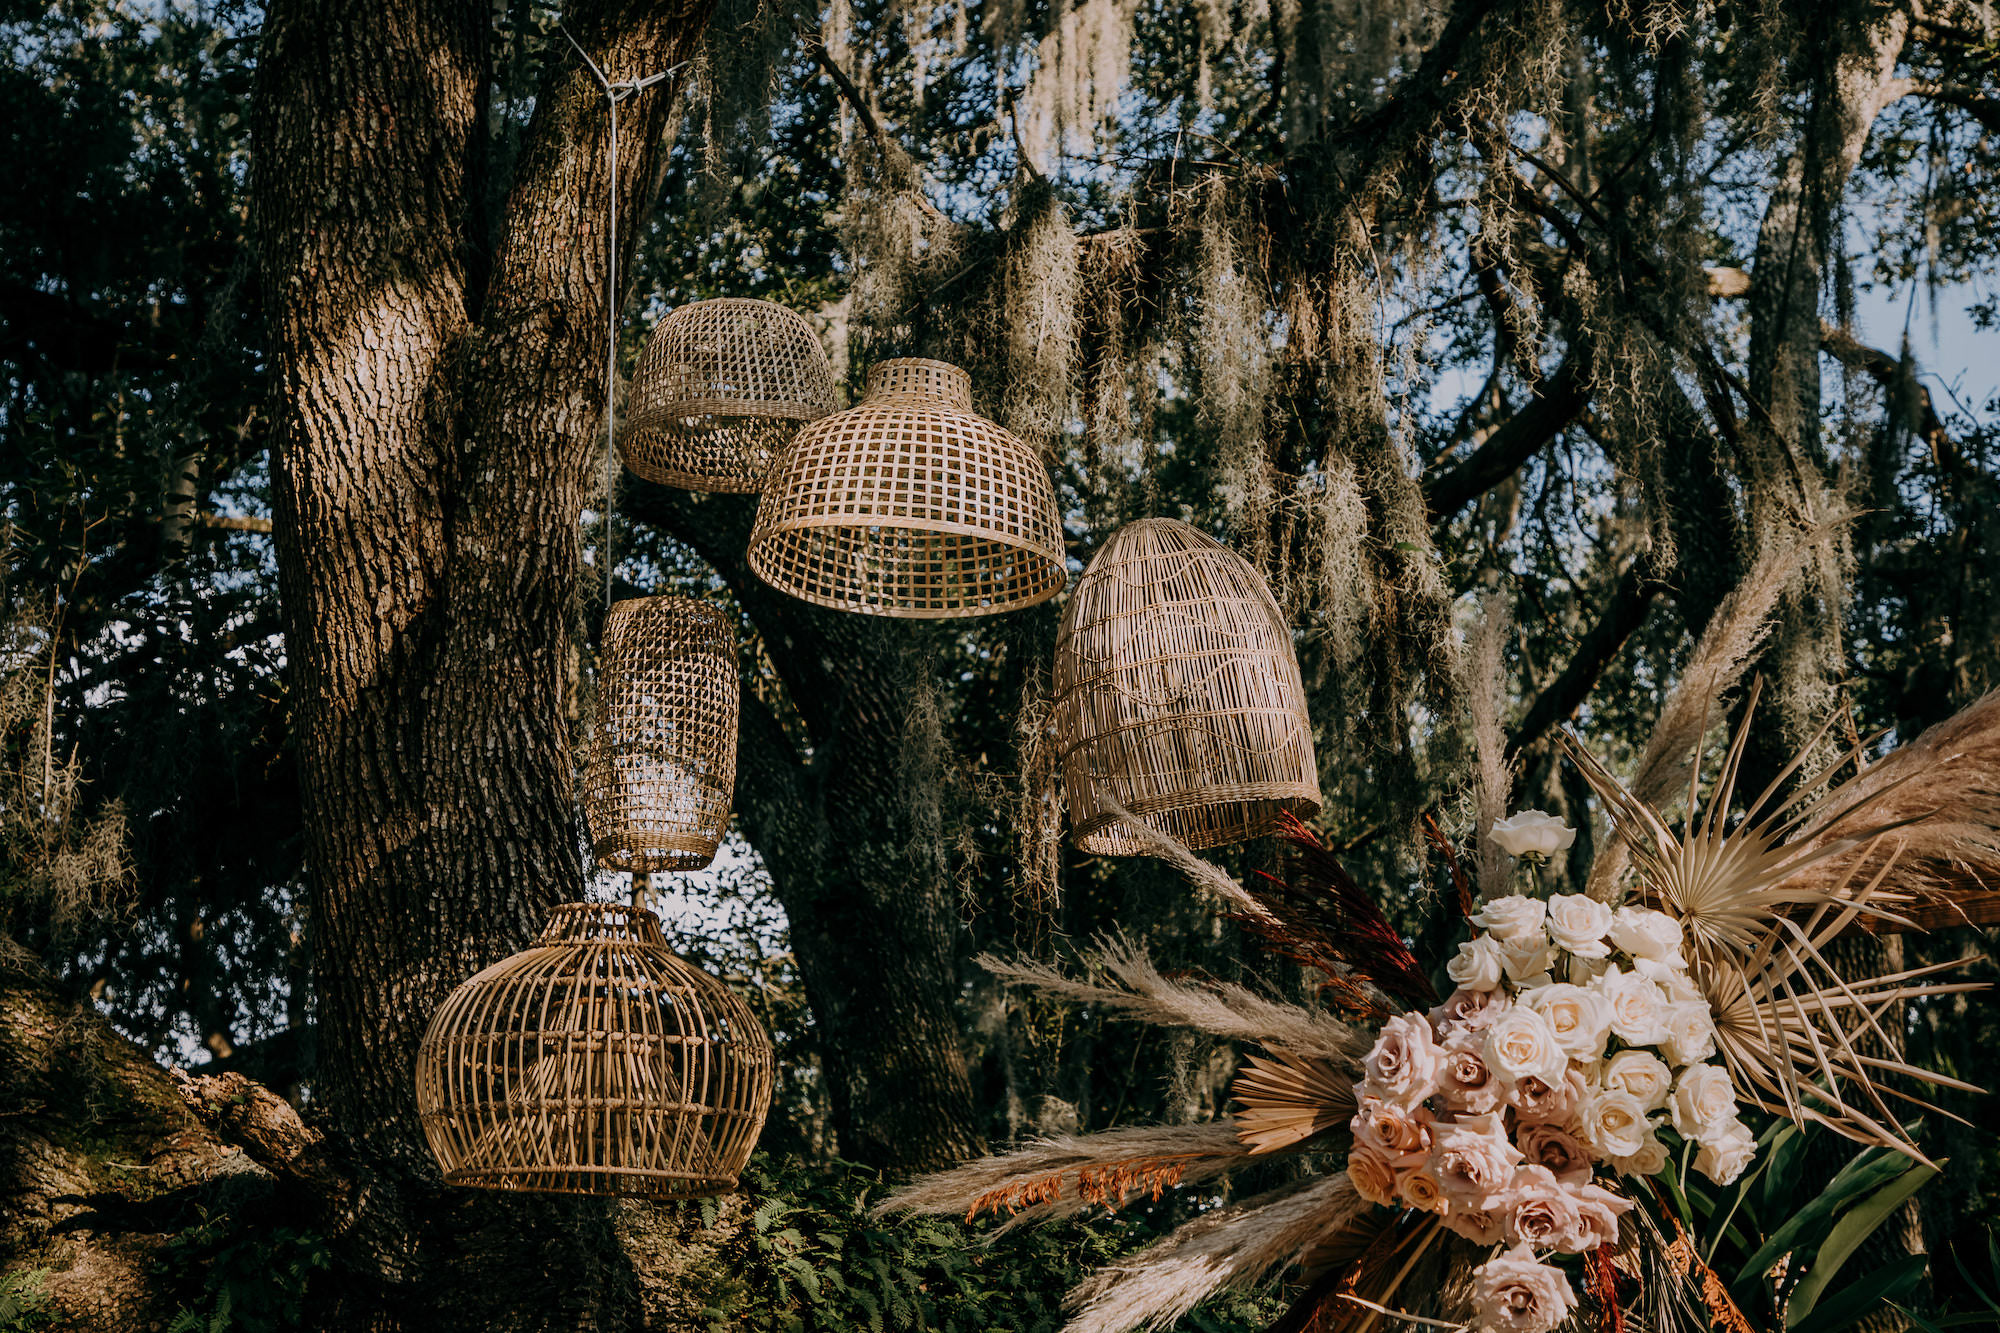 Boho Vintage Wedding Ceremony Decor, Rattan, Wicker Lantern Shades Hanging on Trees | Tampa Bay Wedding Planner Stephany Perry Events